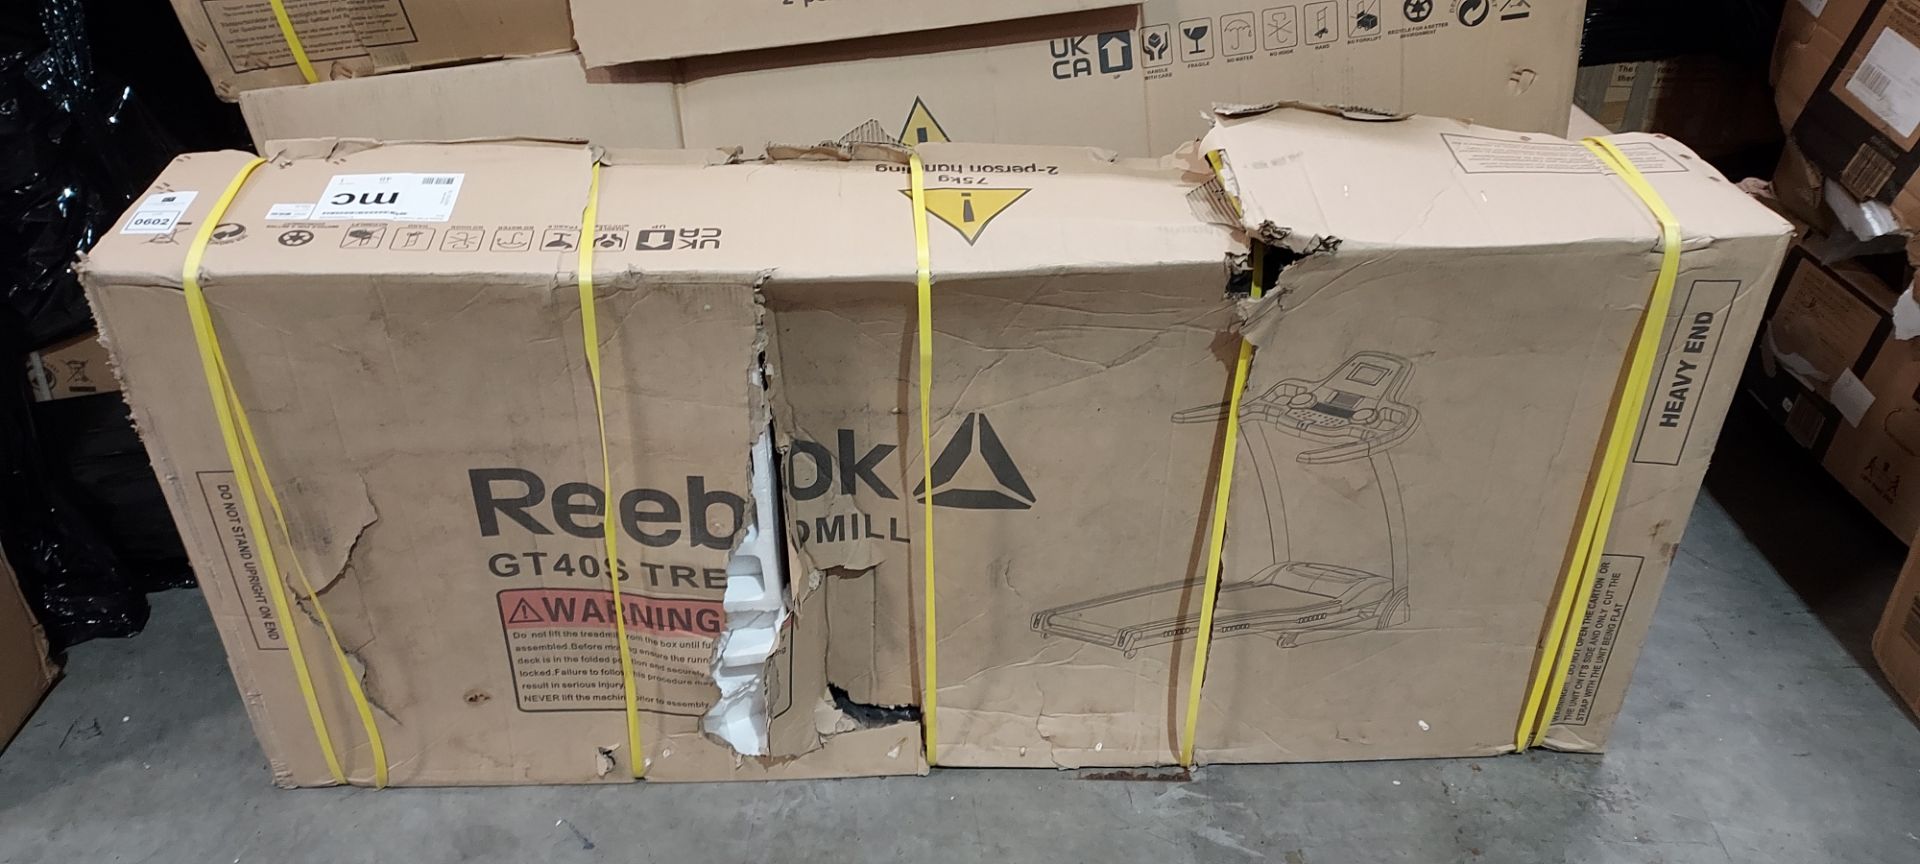 1 X BRAND NEW FACTORY SEALED REEBOK GT40S TREADMILL 00 IN BLACK GROSS WEIGHT 75KG (NOTE BOX - Image 2 of 2